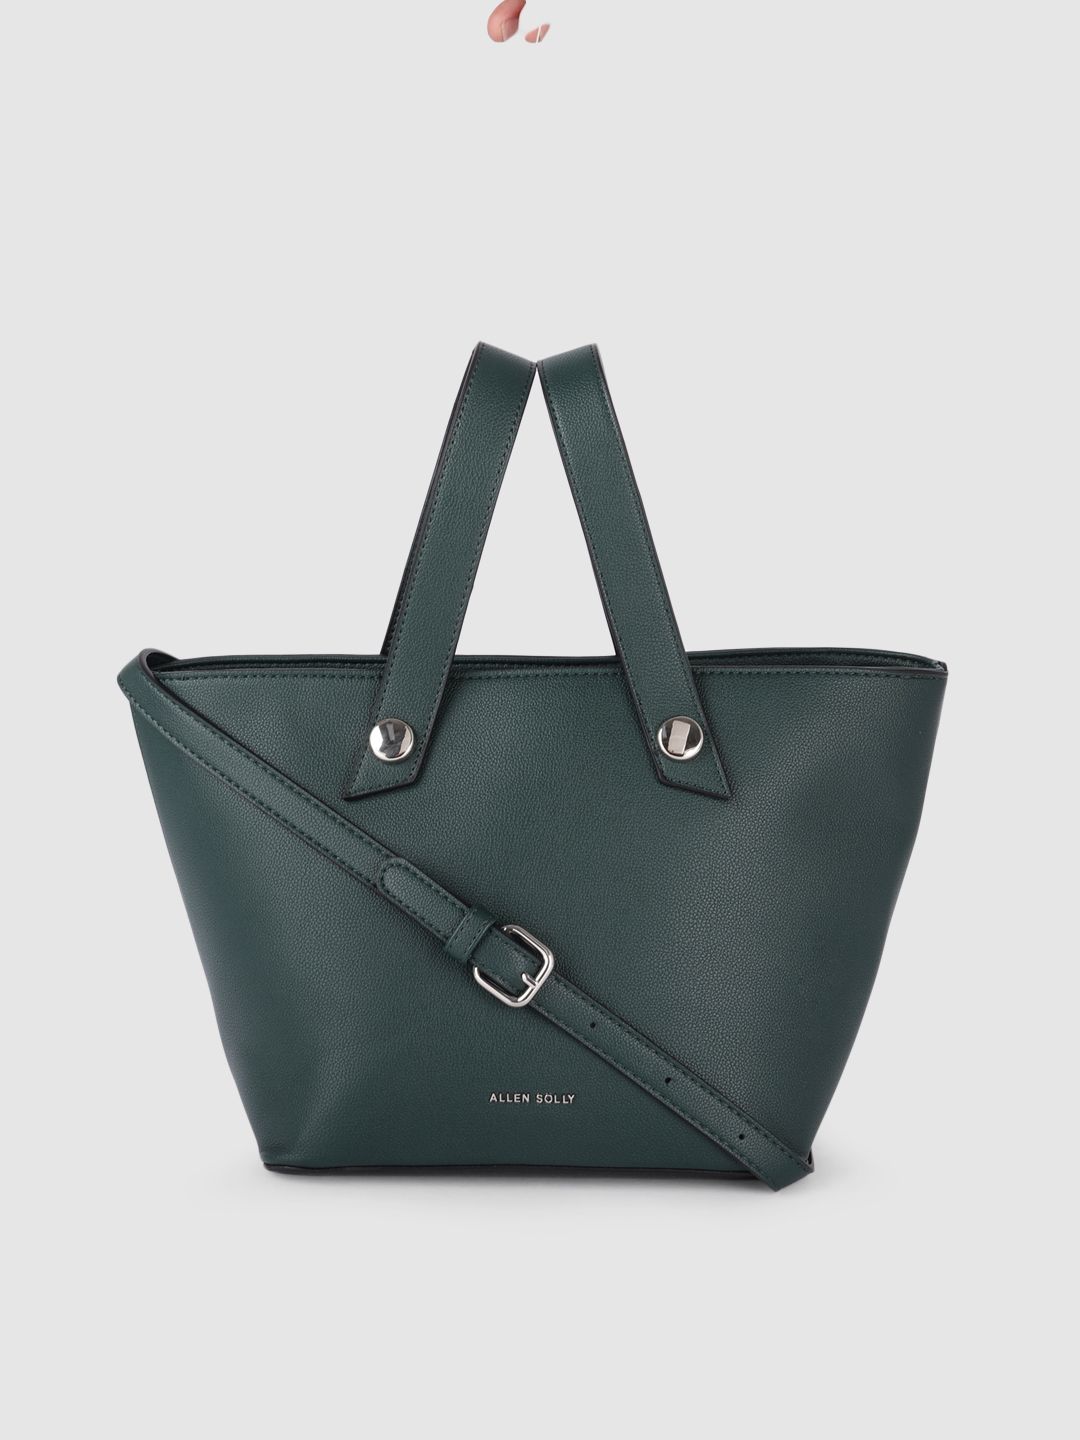 Allen Solly Teal Green PU Structured Handheld Bag Price in India